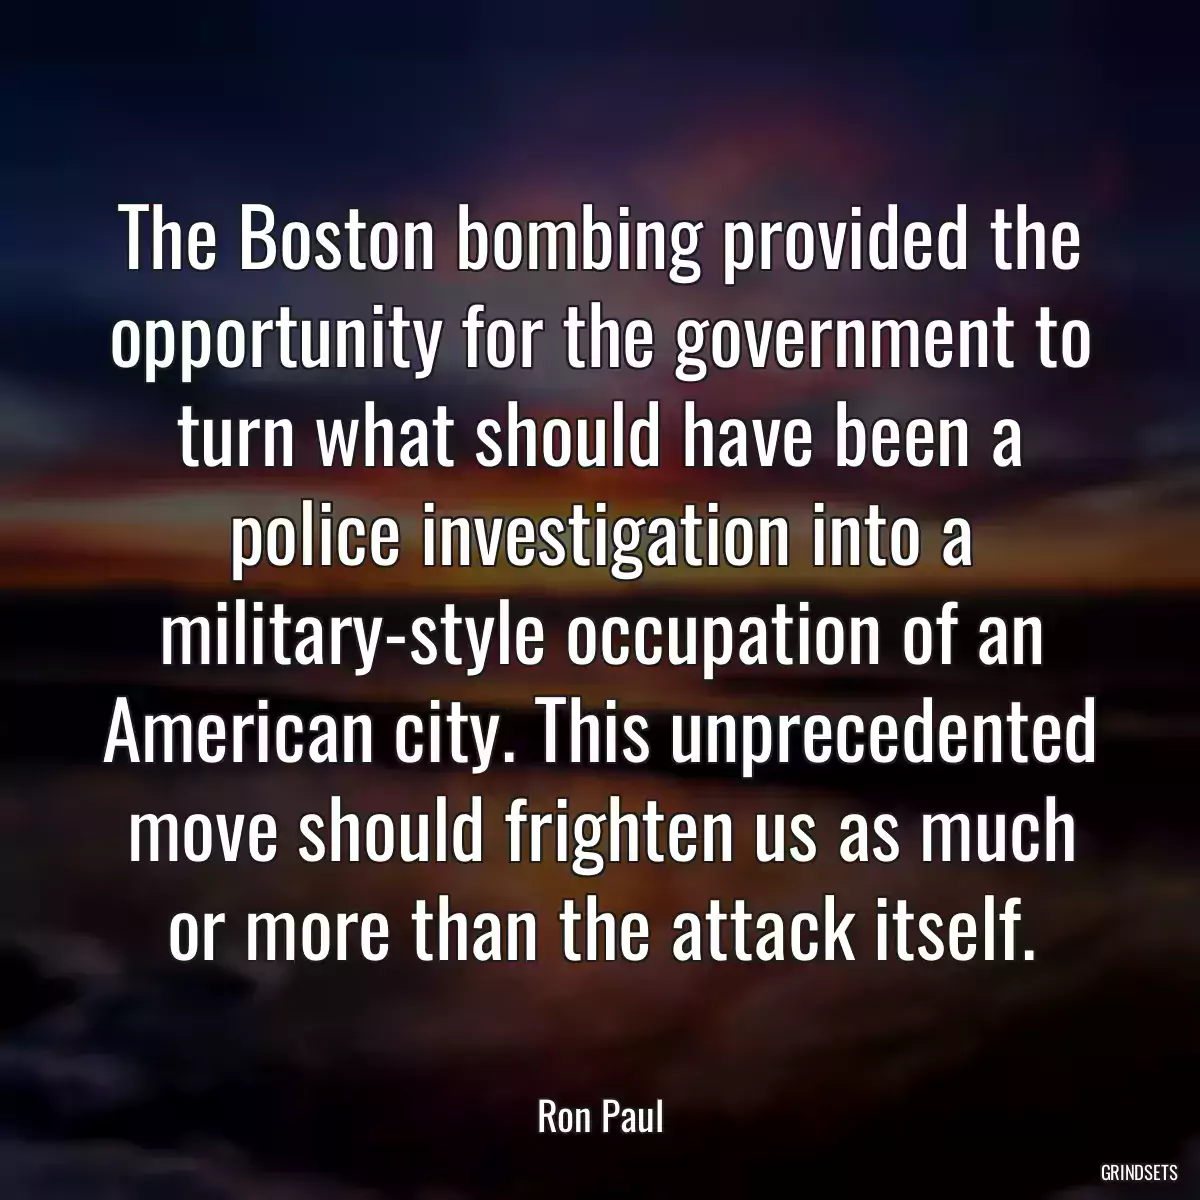 The Boston bombing provided the opportunity for the government to turn what should have been a police investigation into a military-style occupation of an American city. This unprecedented move should frighten us as much or more than the attack itself.